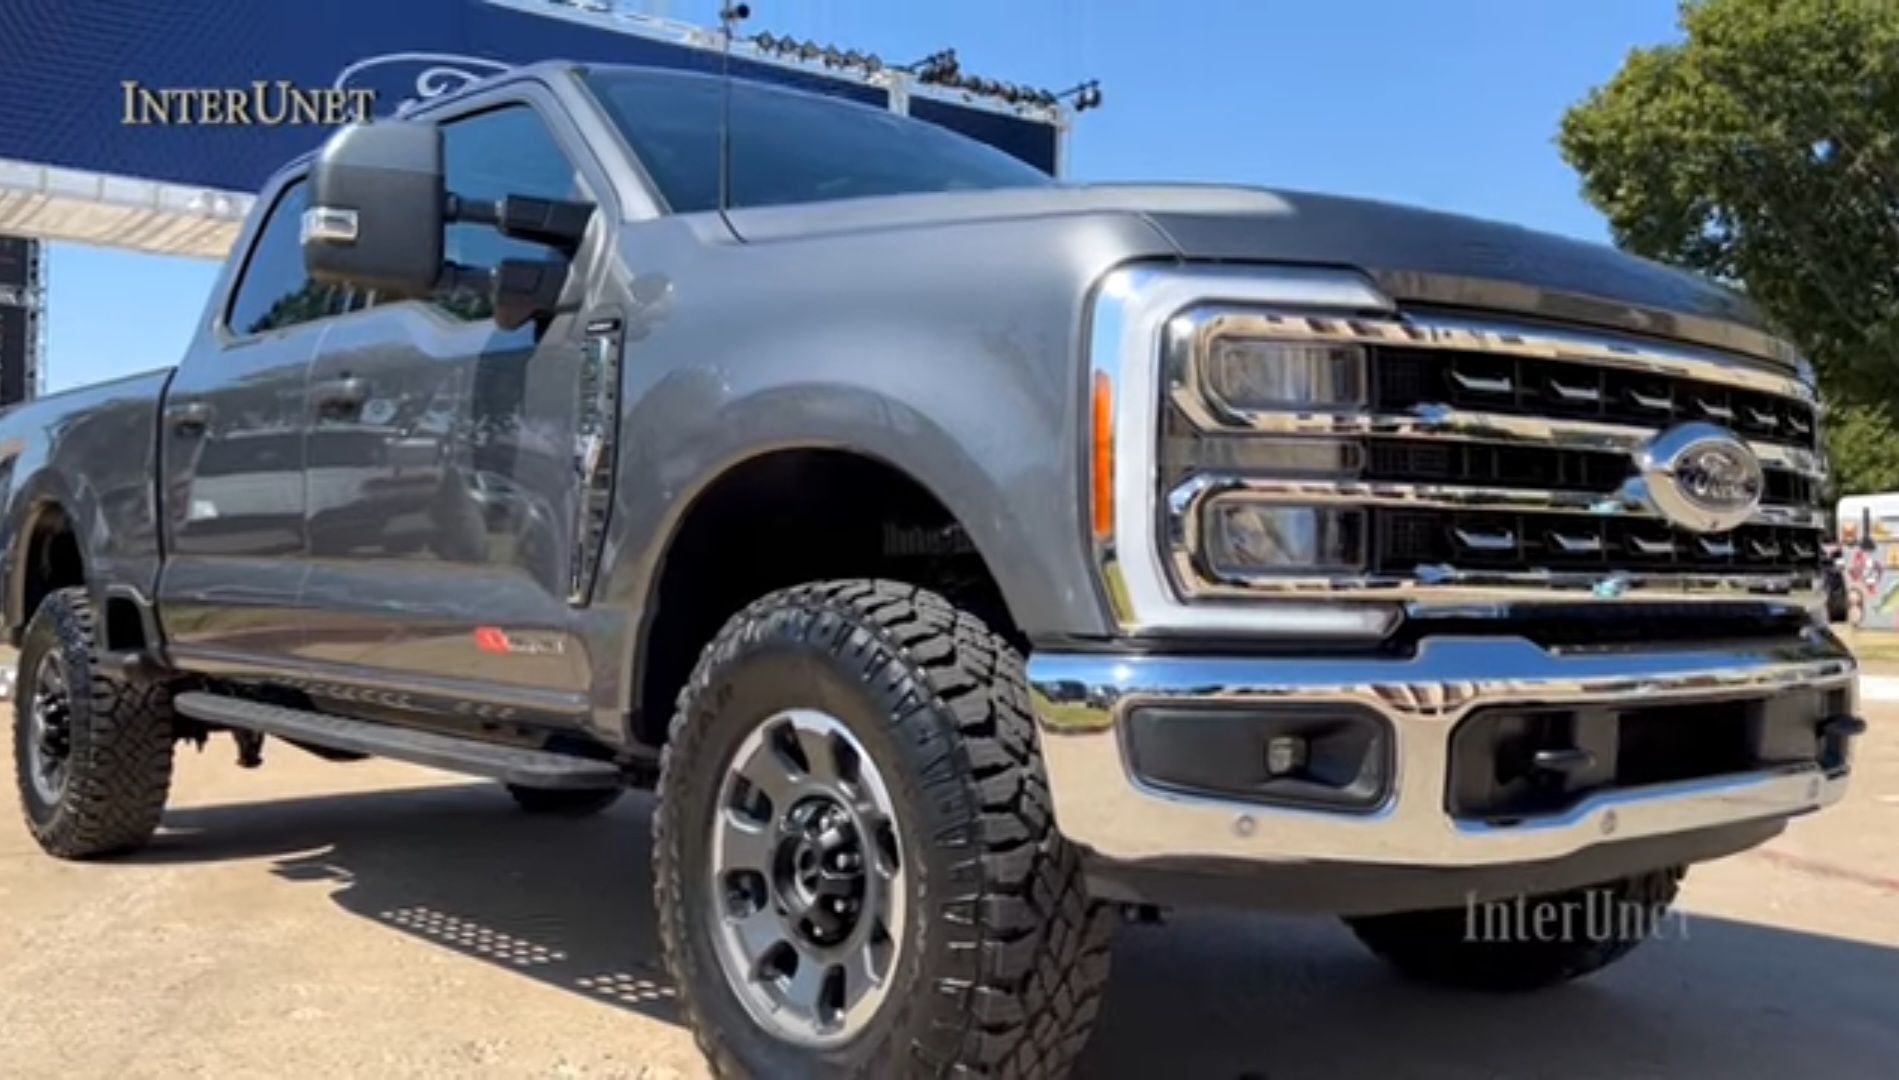 2020 f350 super duty coolant - Ford Truck Enthusiasts Forums